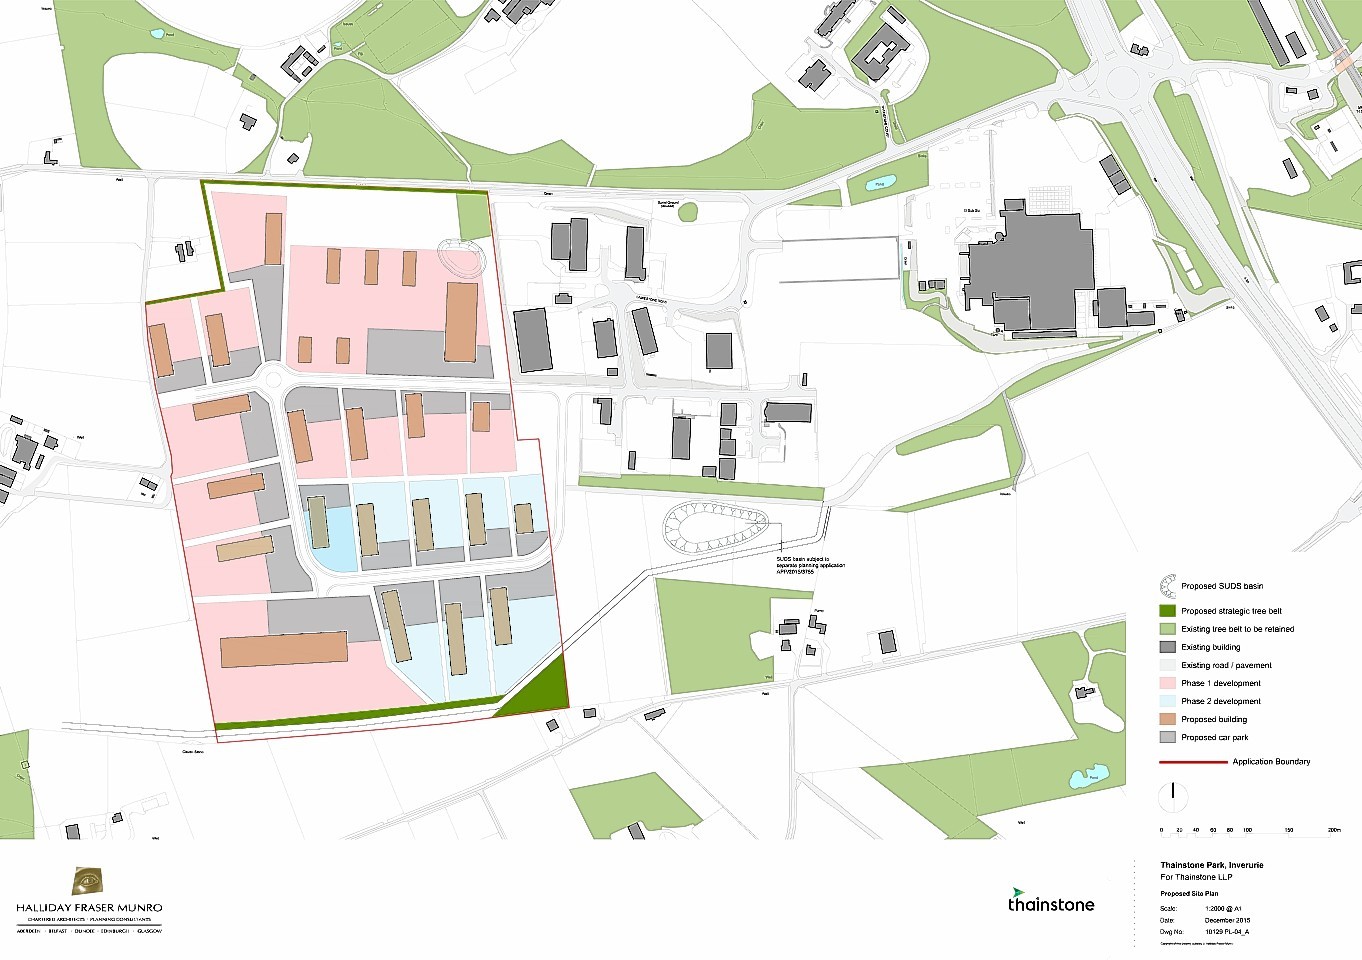 The plans for the new business park to the west of the existing Thainstone Centre.